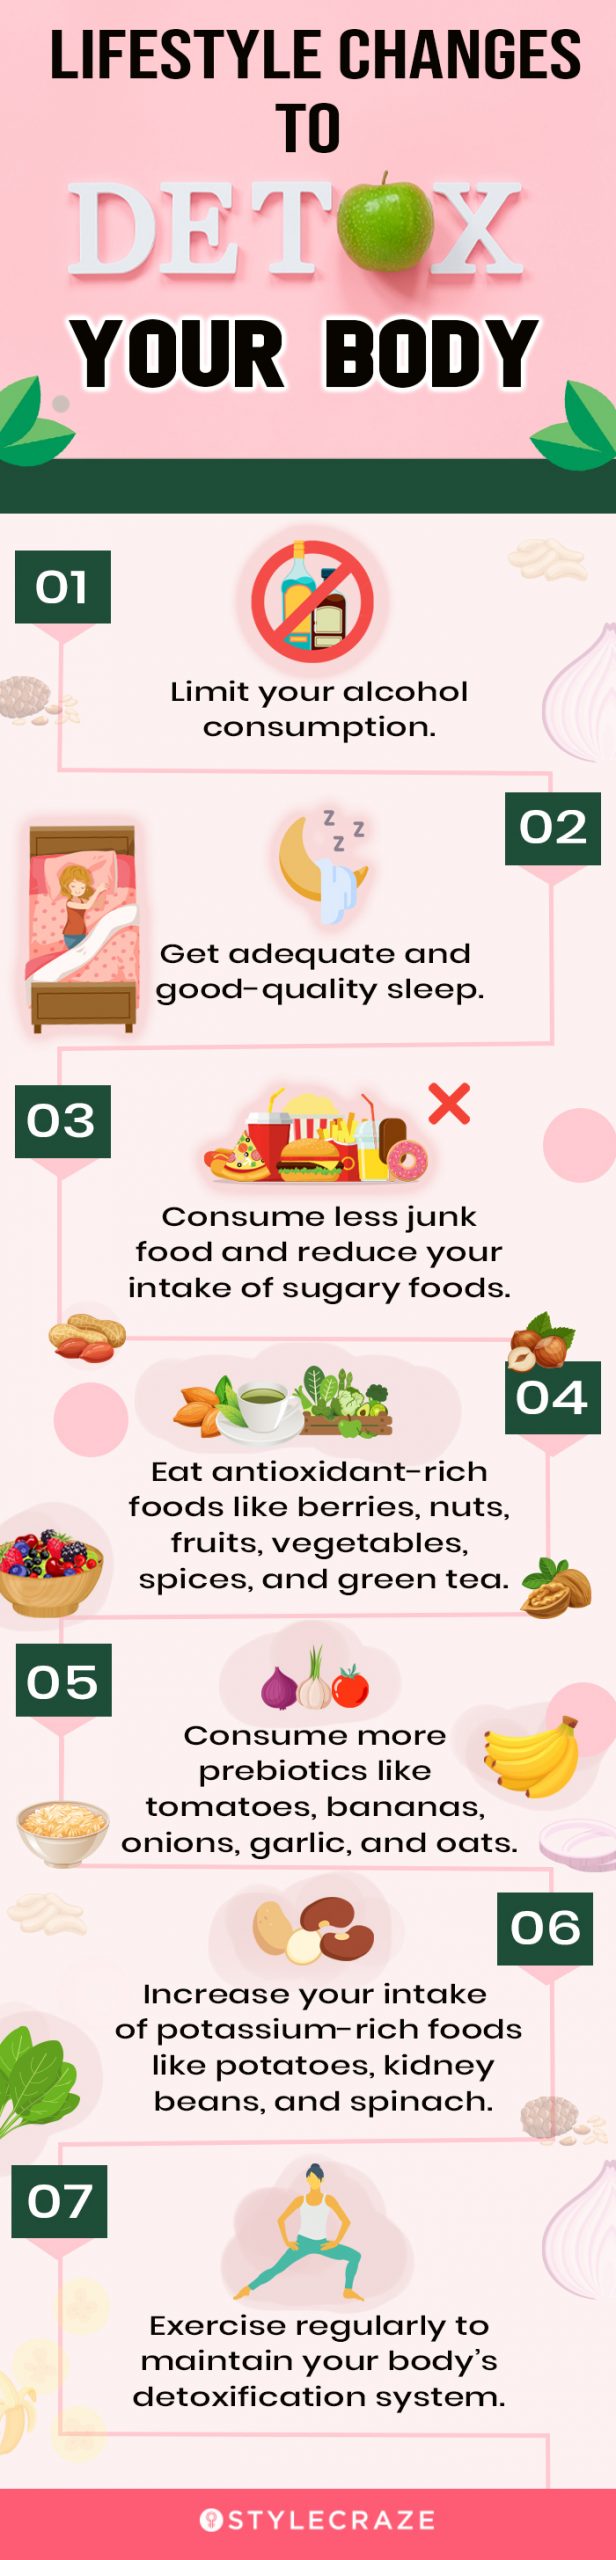 lifestyle changes to detox your body (infographic)